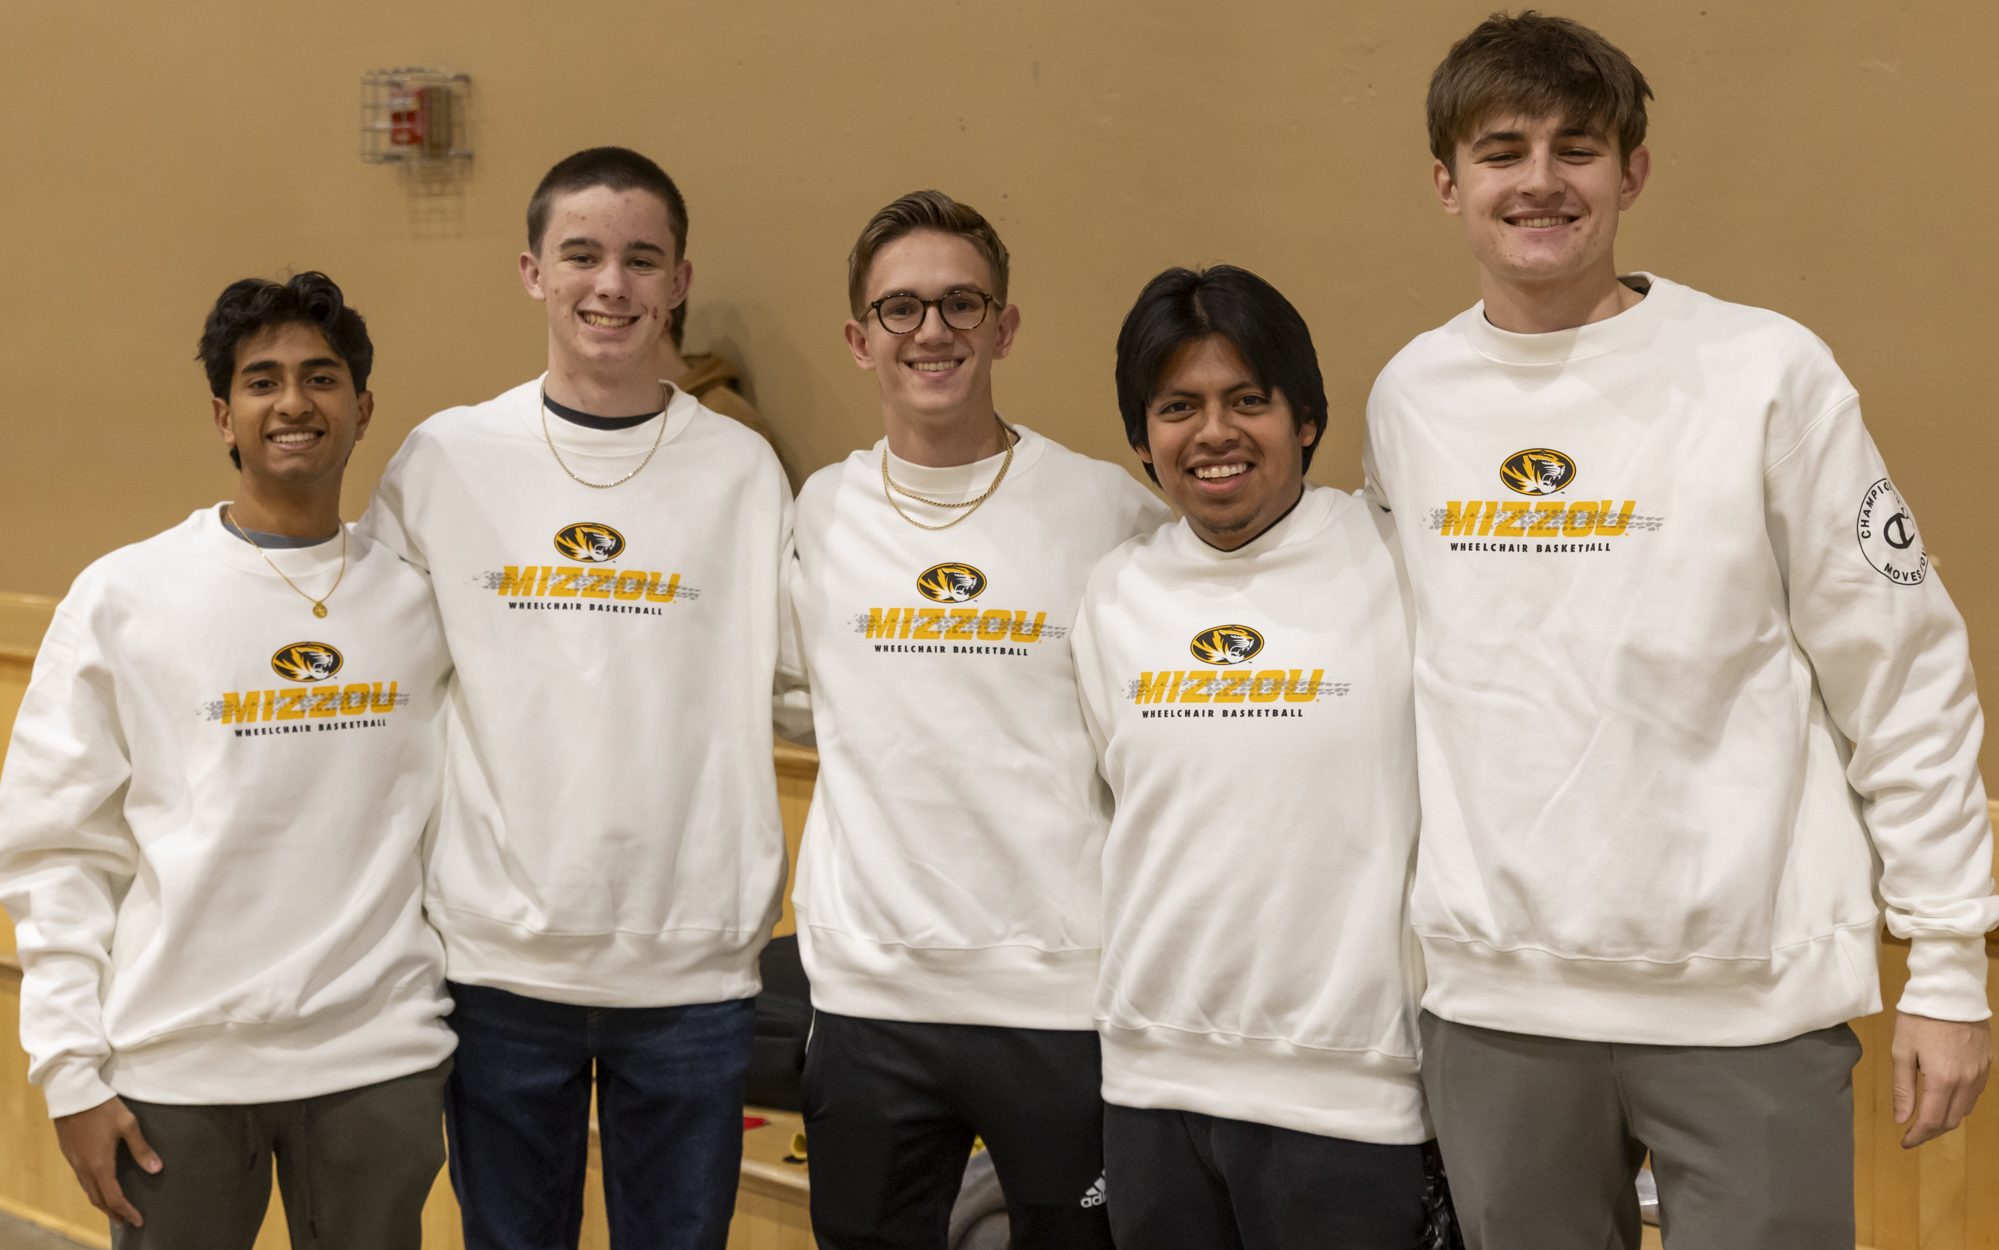 Students who attended the Dec. 1 game received team-branded Champion sweatshirts.